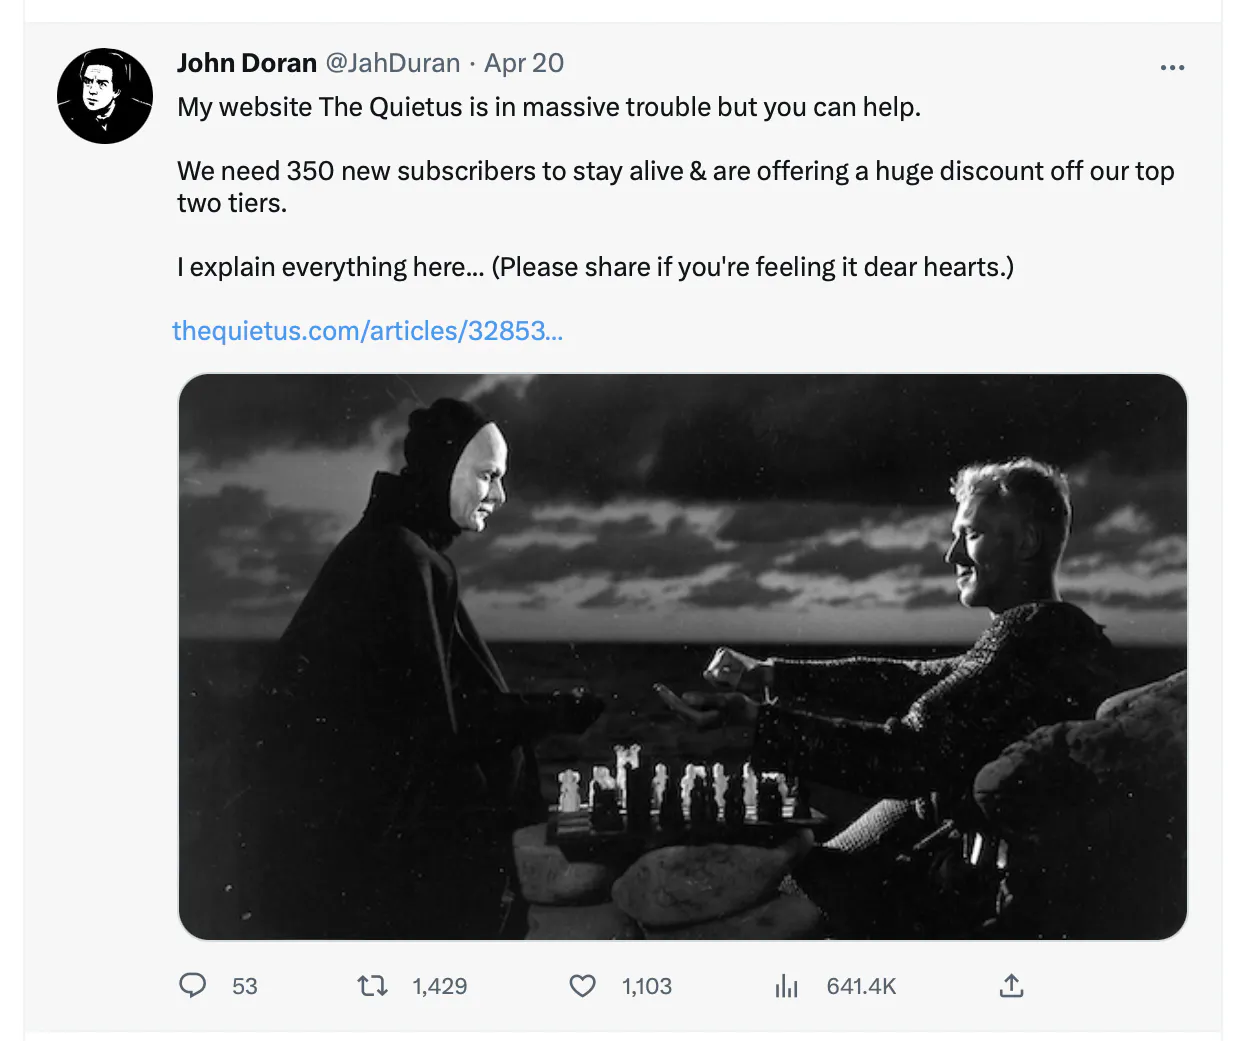 John Doran's tweet says "My website The Quietus is in trouble but you can help" with a film still from The Seventh Seal, a character playing chess with Death.